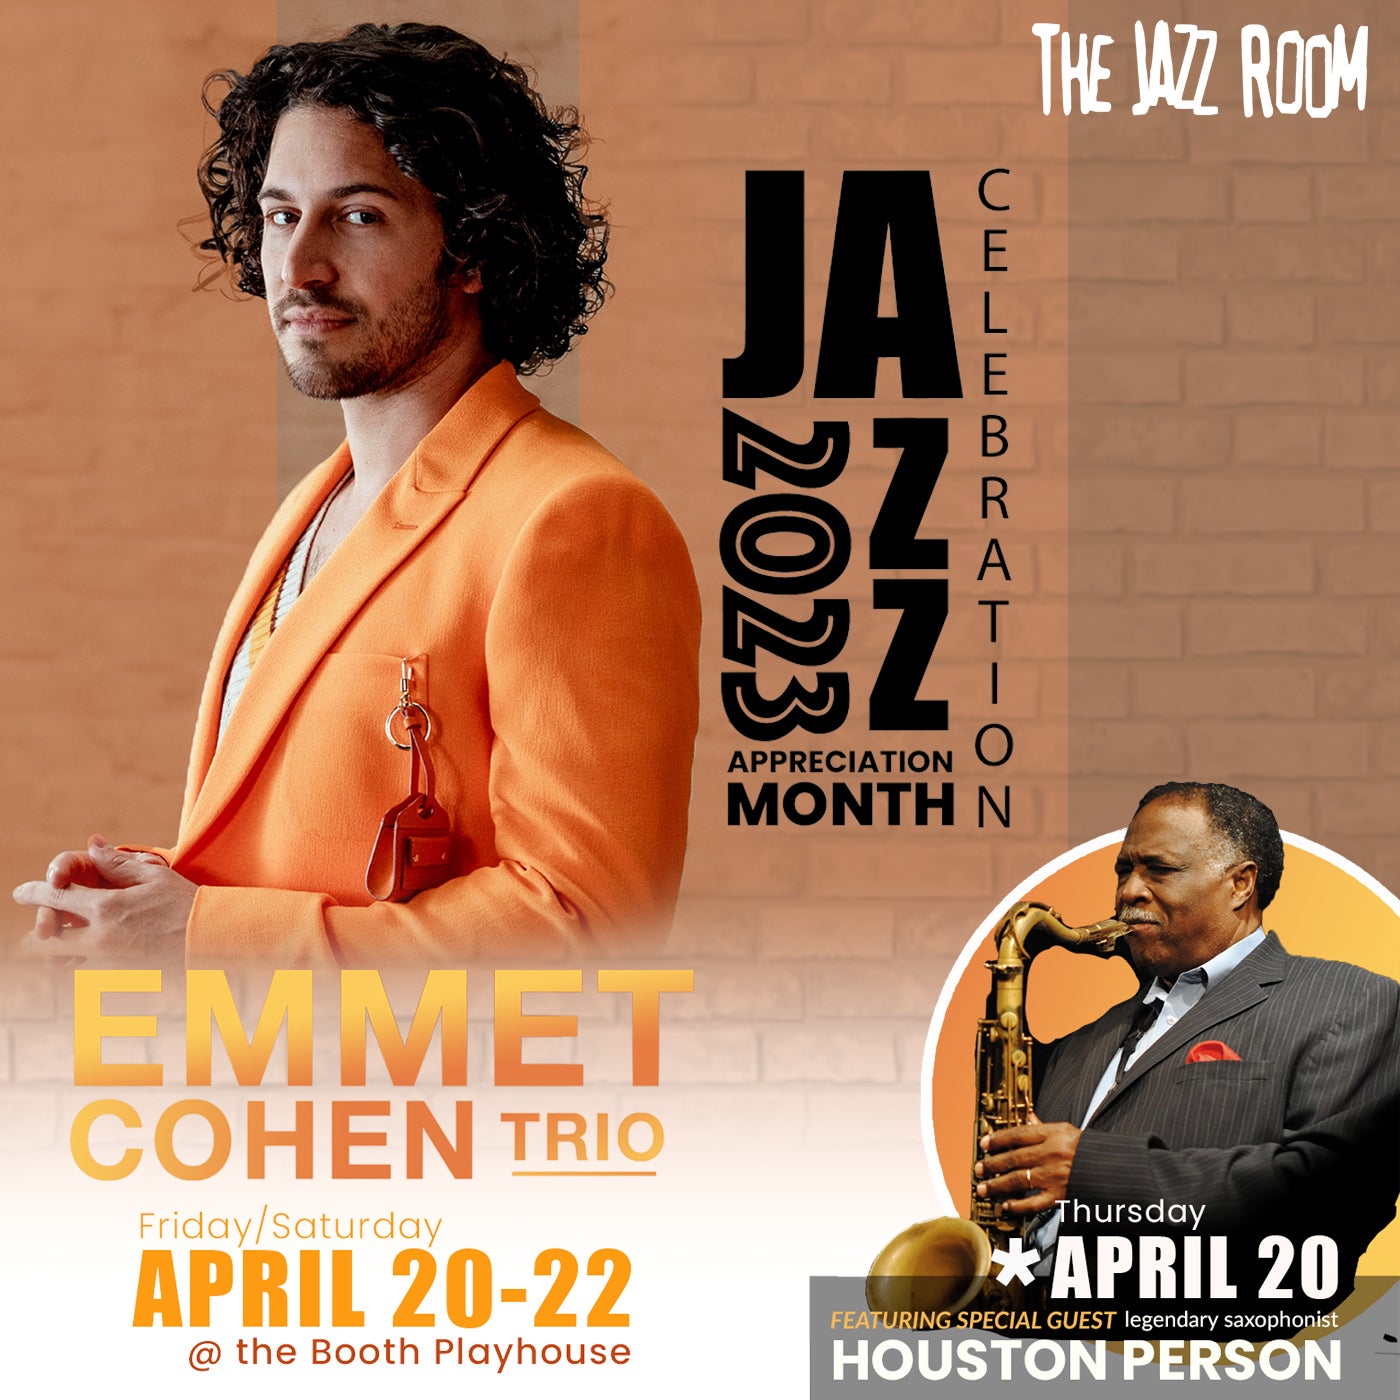 JAZZ ROOM Presents Emmet Cohen Trio with special guest, saxophonist Houston Person (MODERN CLASSIC JAZZ PIANO)